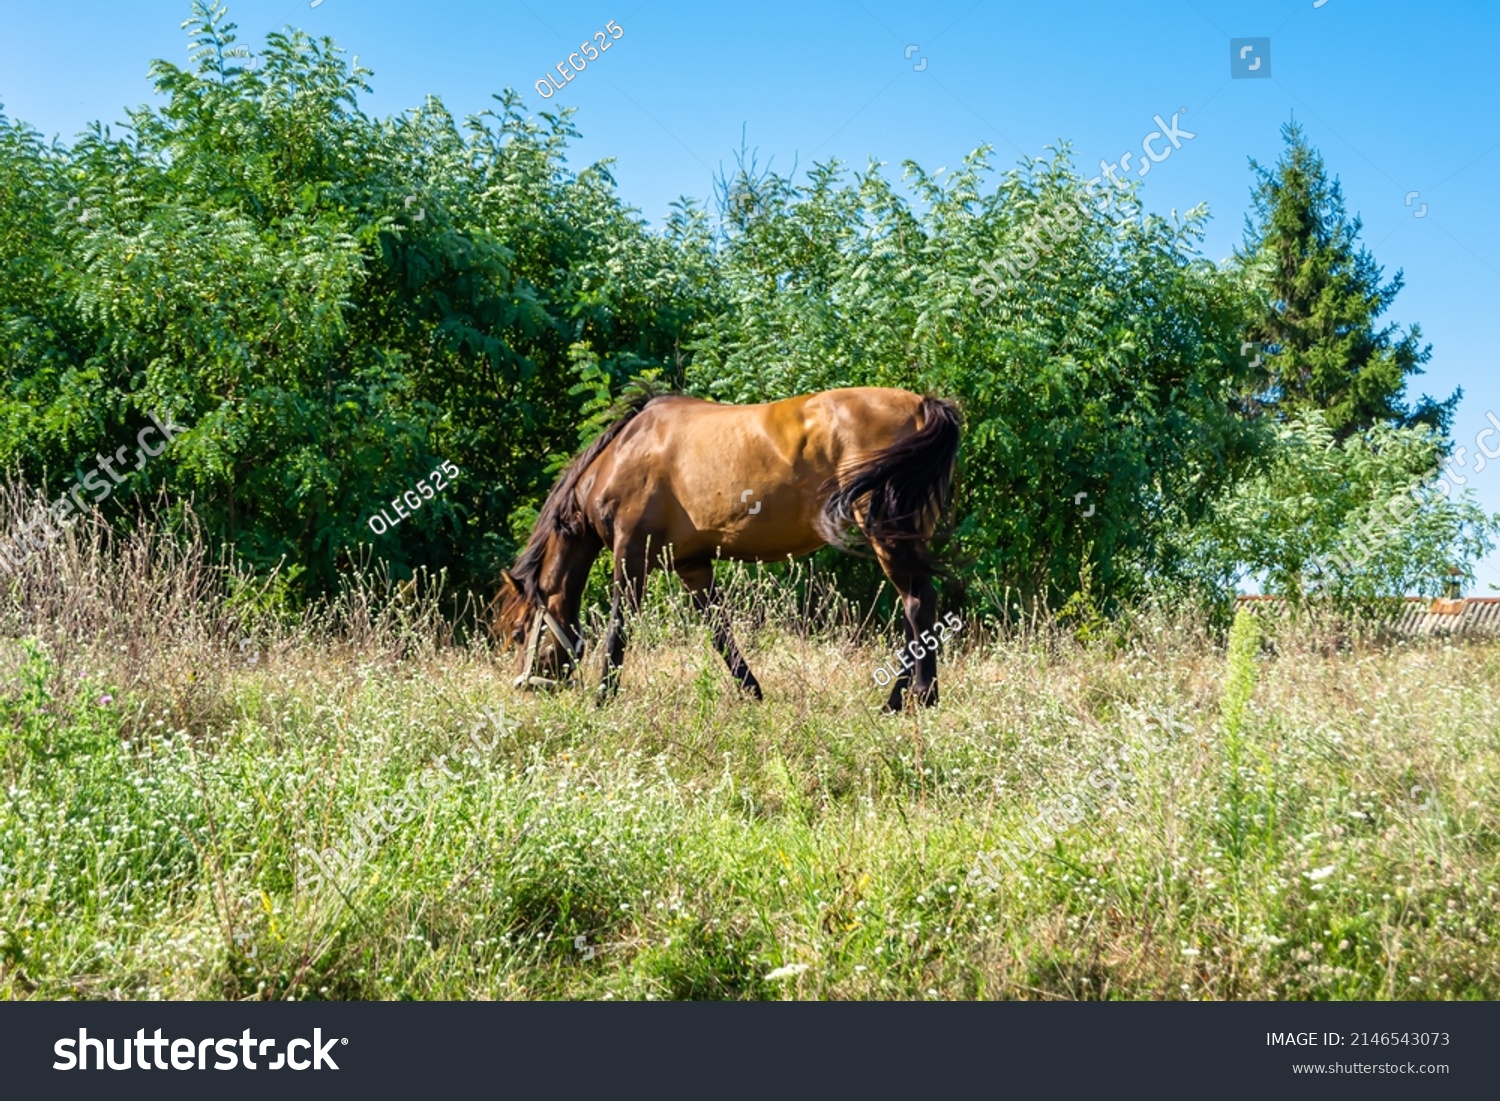 Beautiful wild brown horse stallion on summer flower meadow, equine eating green grass. Horse stallion with long mane portrait in standing position. Equine stallion outdoors, big horse equines. #2146543073